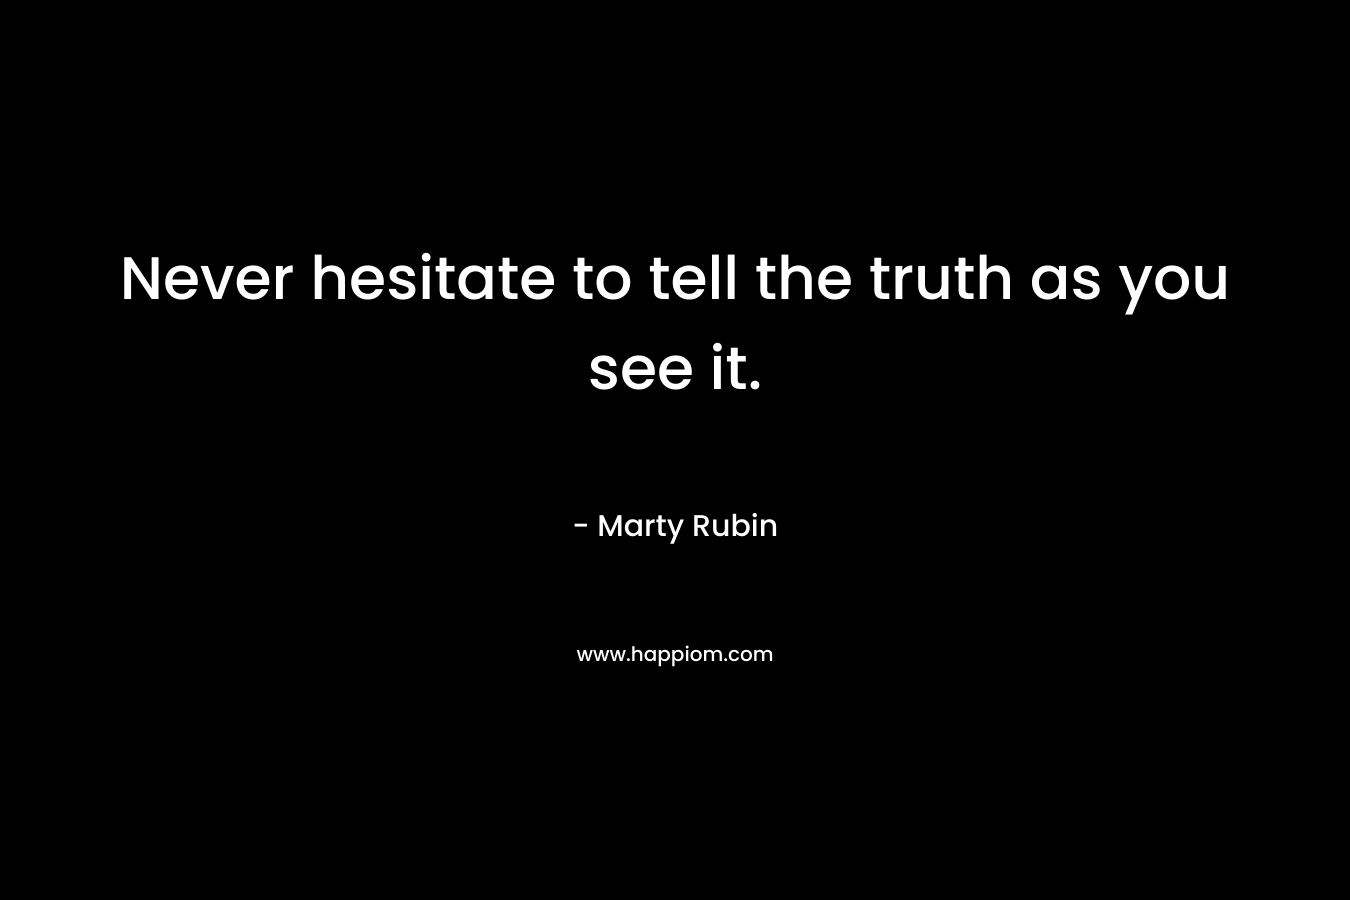 Never hesitate to tell the truth as you see it. – Marty Rubin